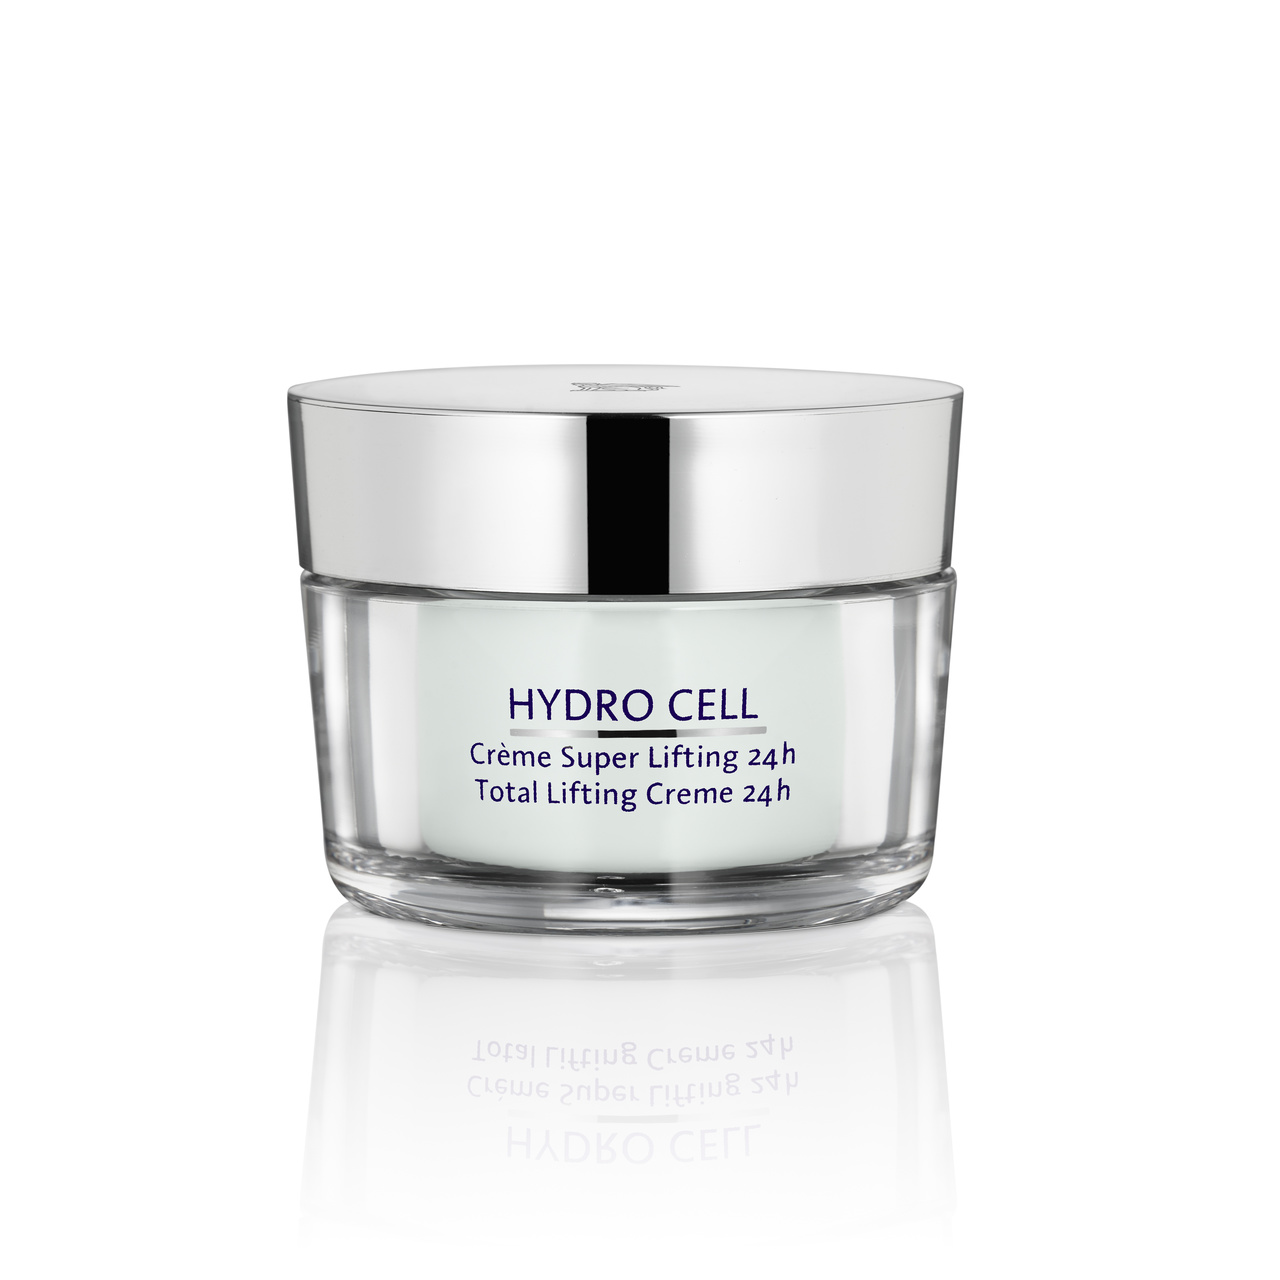 HYDRO CELL Total Lifting Cream 24h